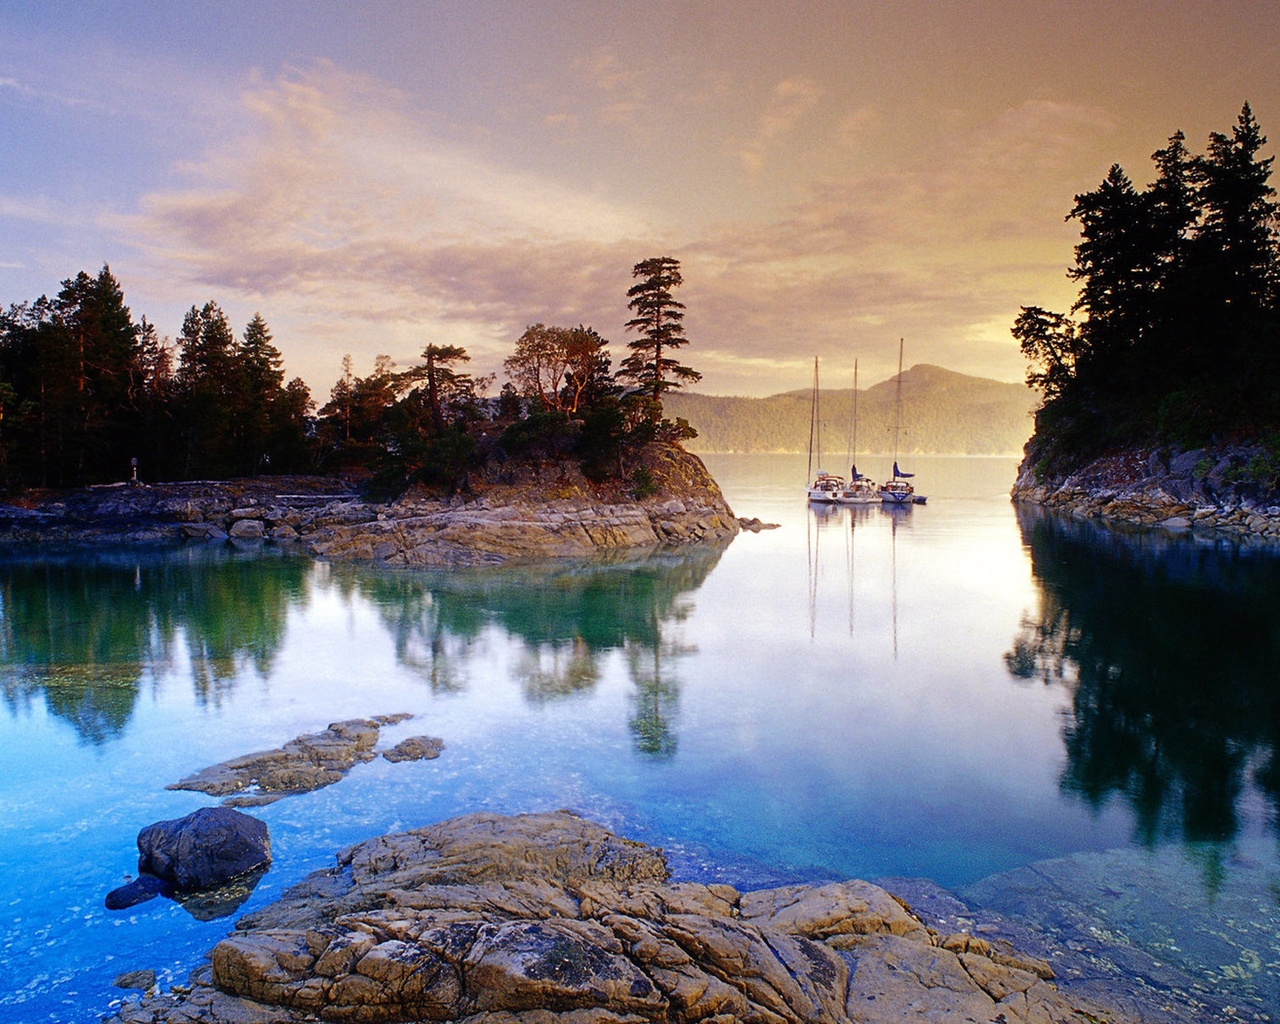 Image: Lake, water, stones, forest, trees, sky, mountains, reflection, yacht